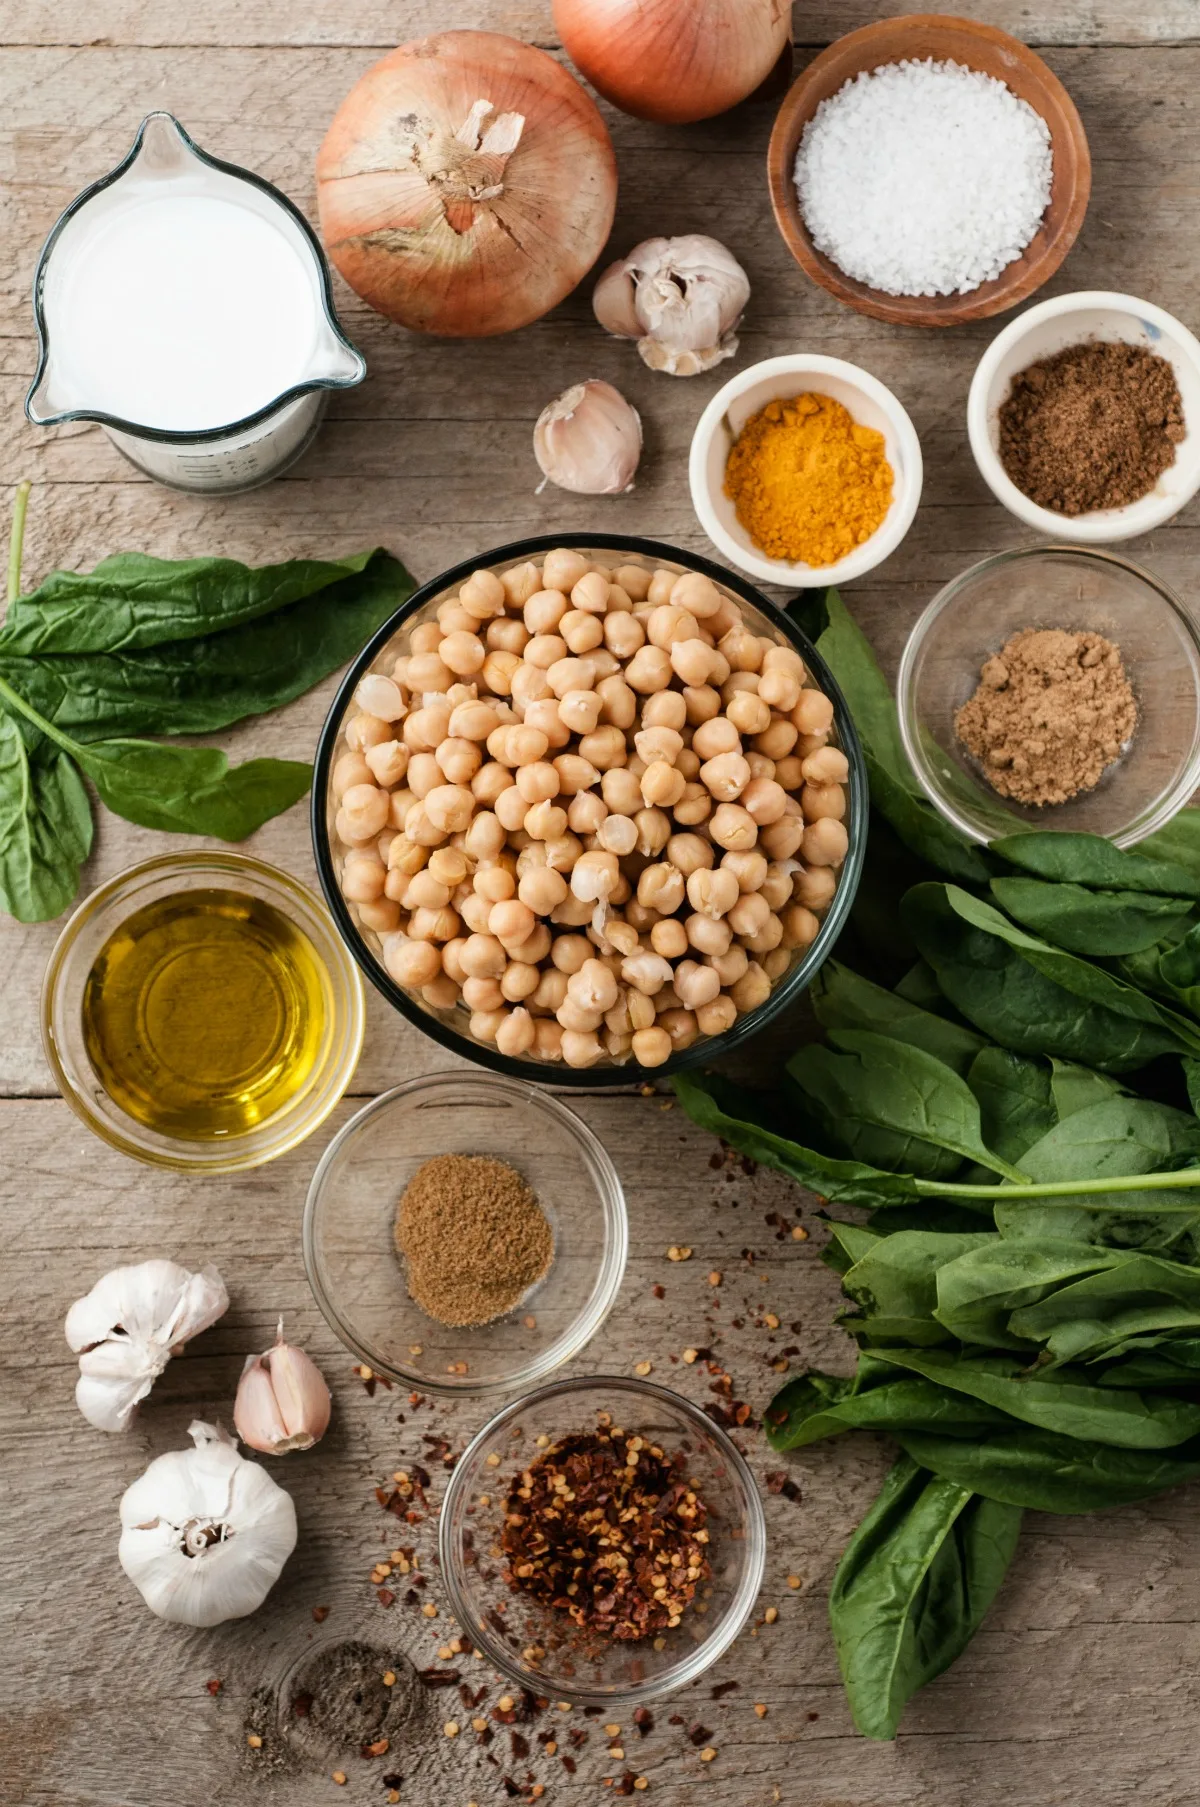 Ingredients for chickpea curry recipe.